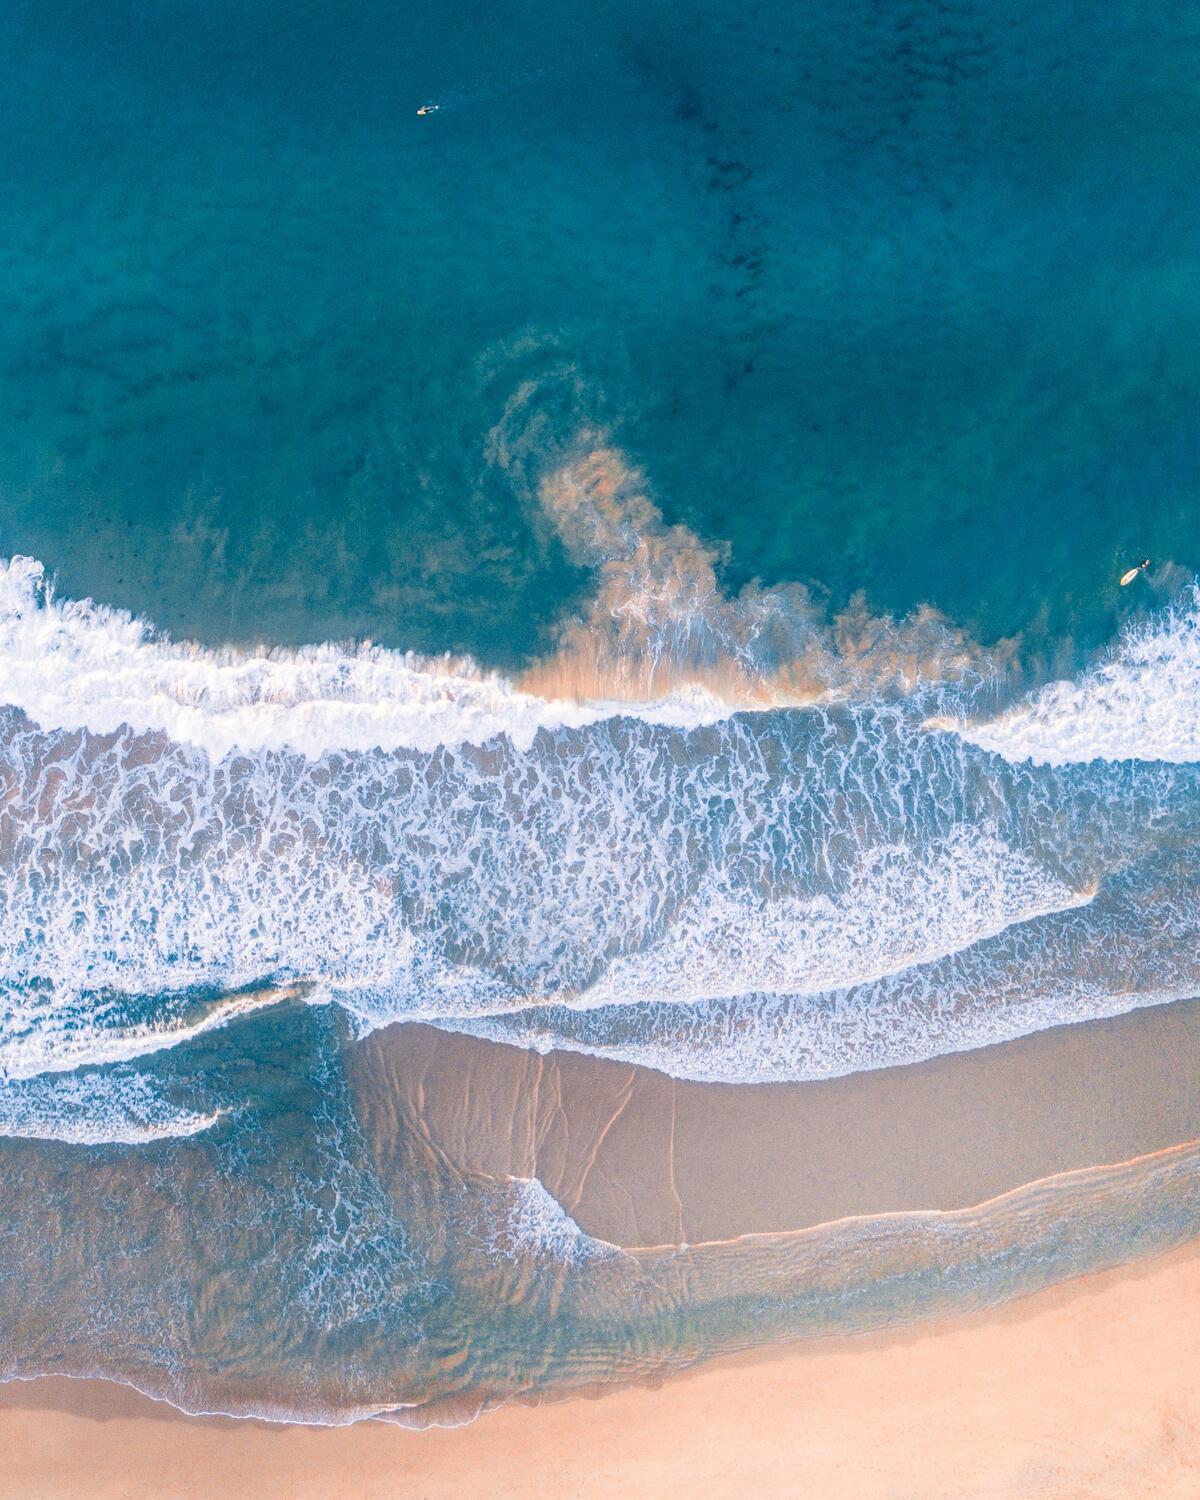 Waves on the shore seen from above